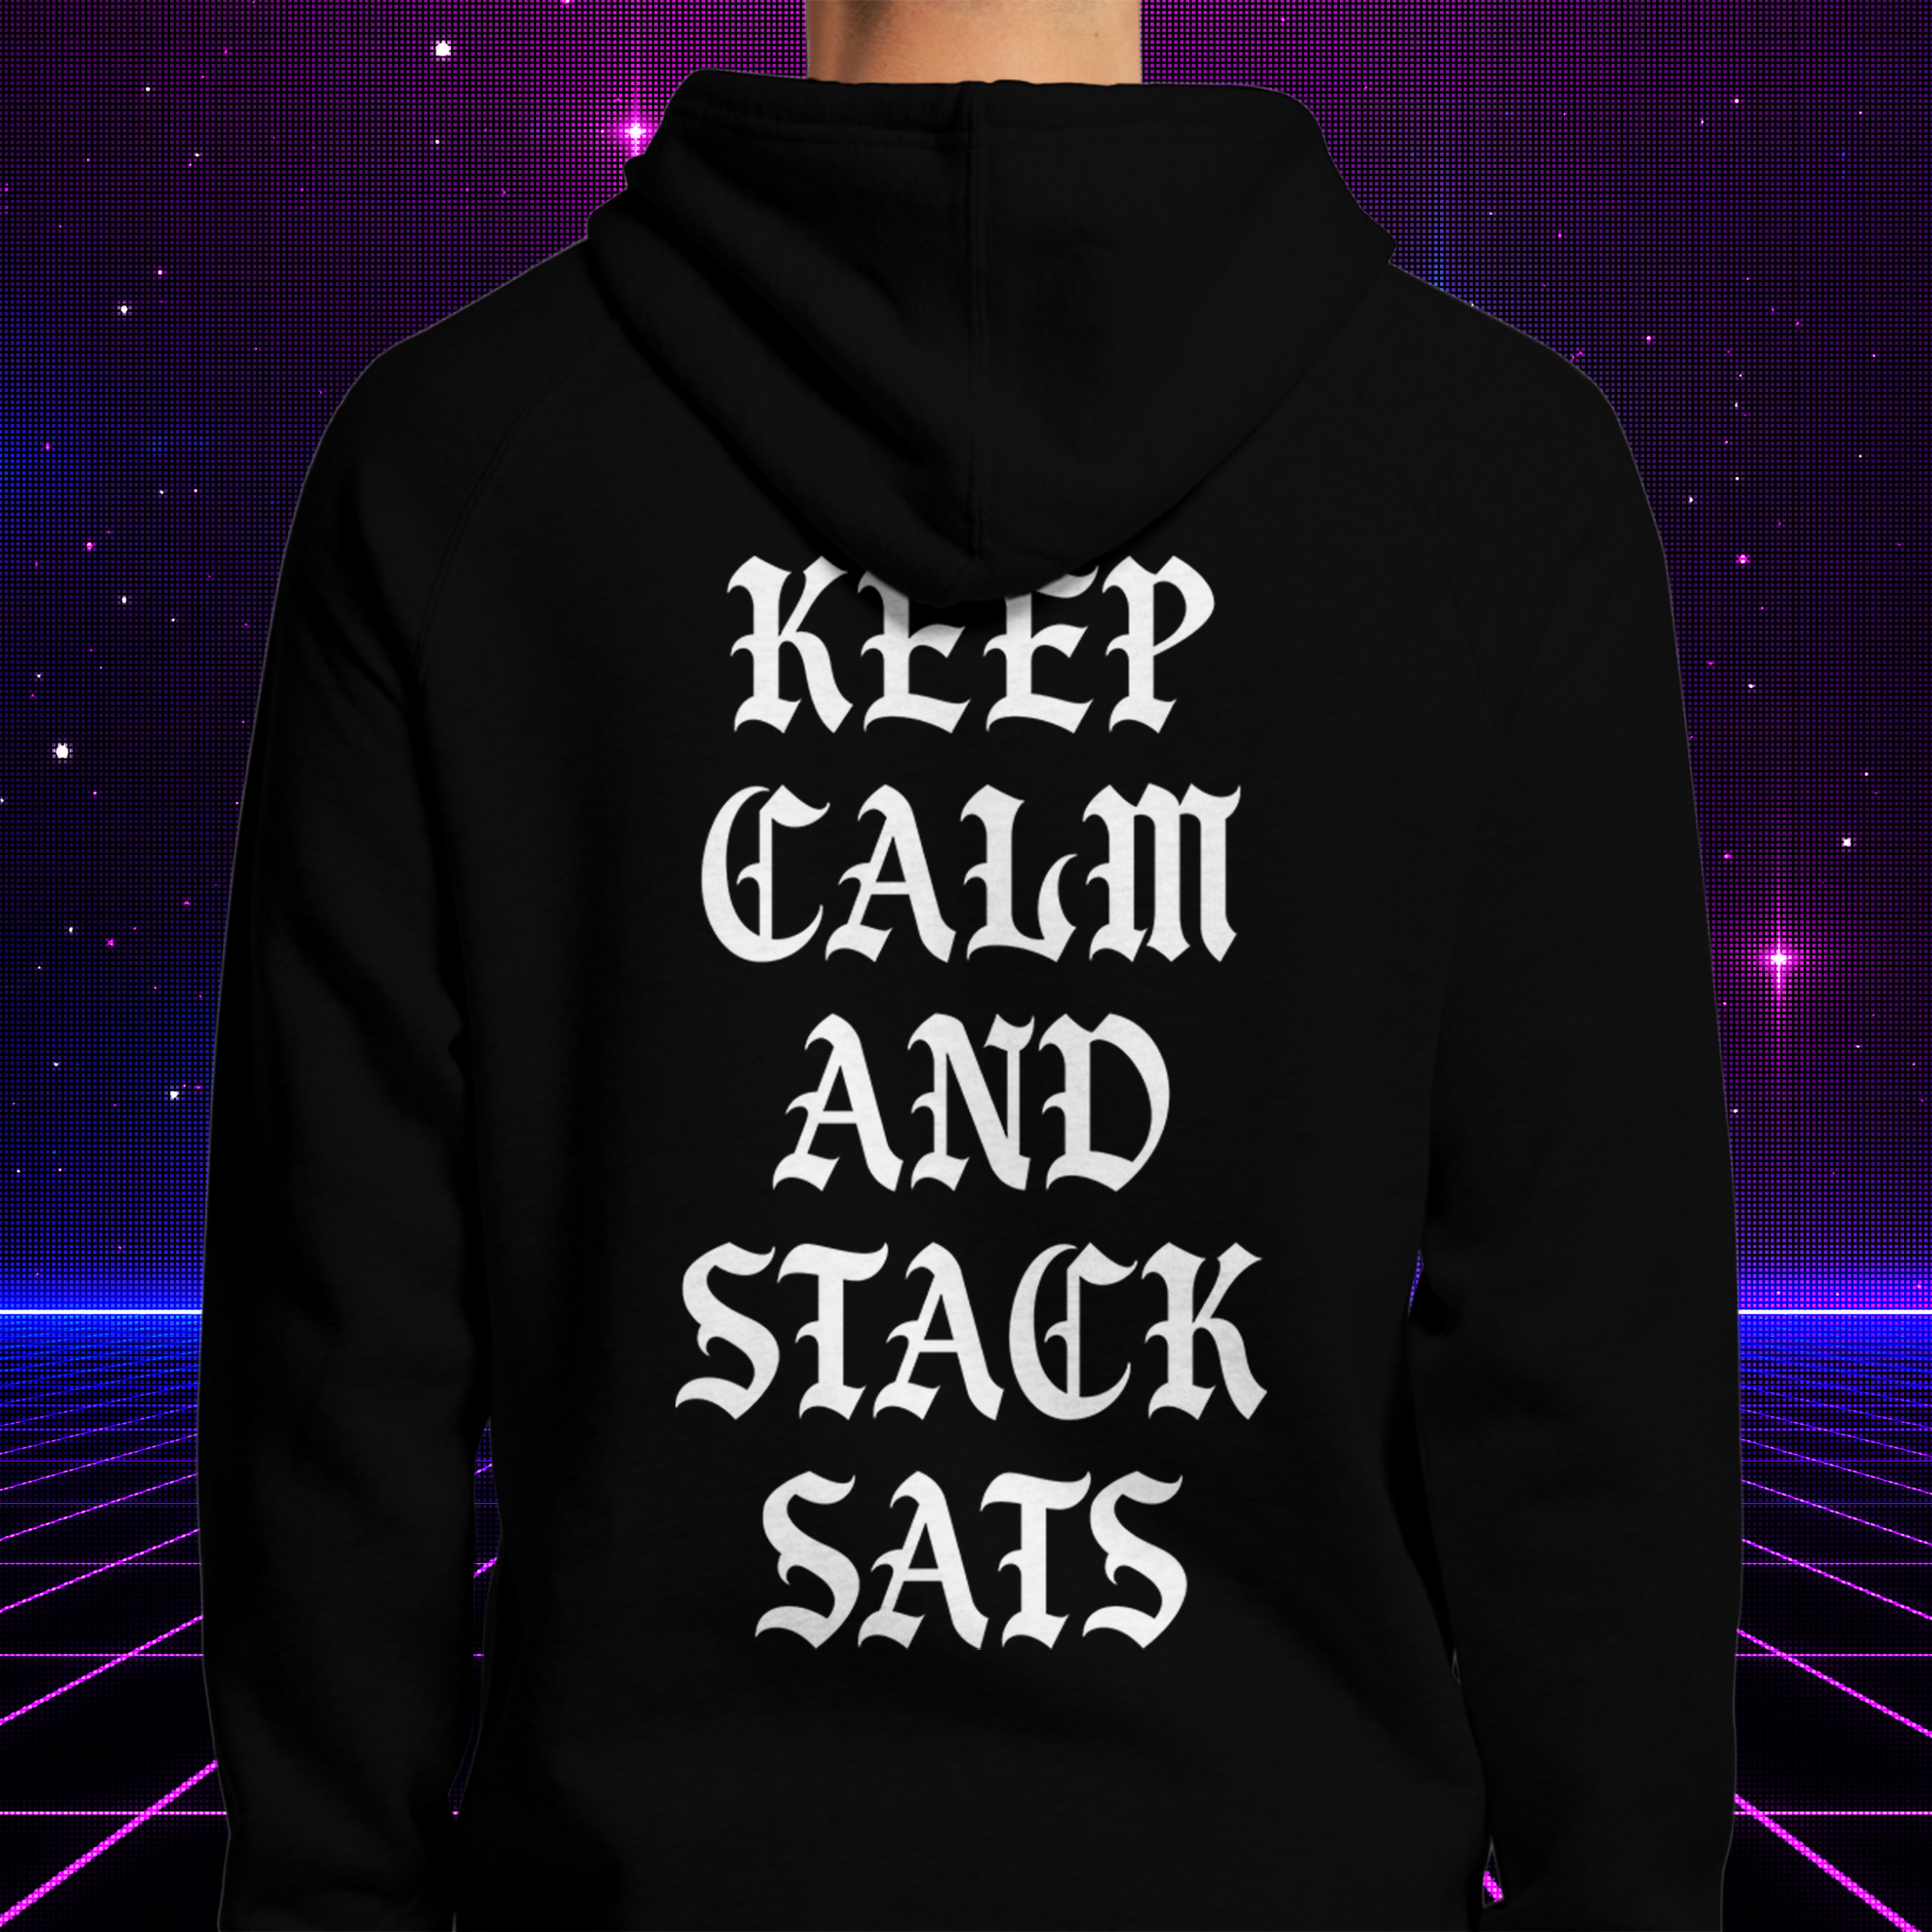 Bitcoin Clothing - Keep Calm And Stack Sats Hoodie. Male model image (front view).